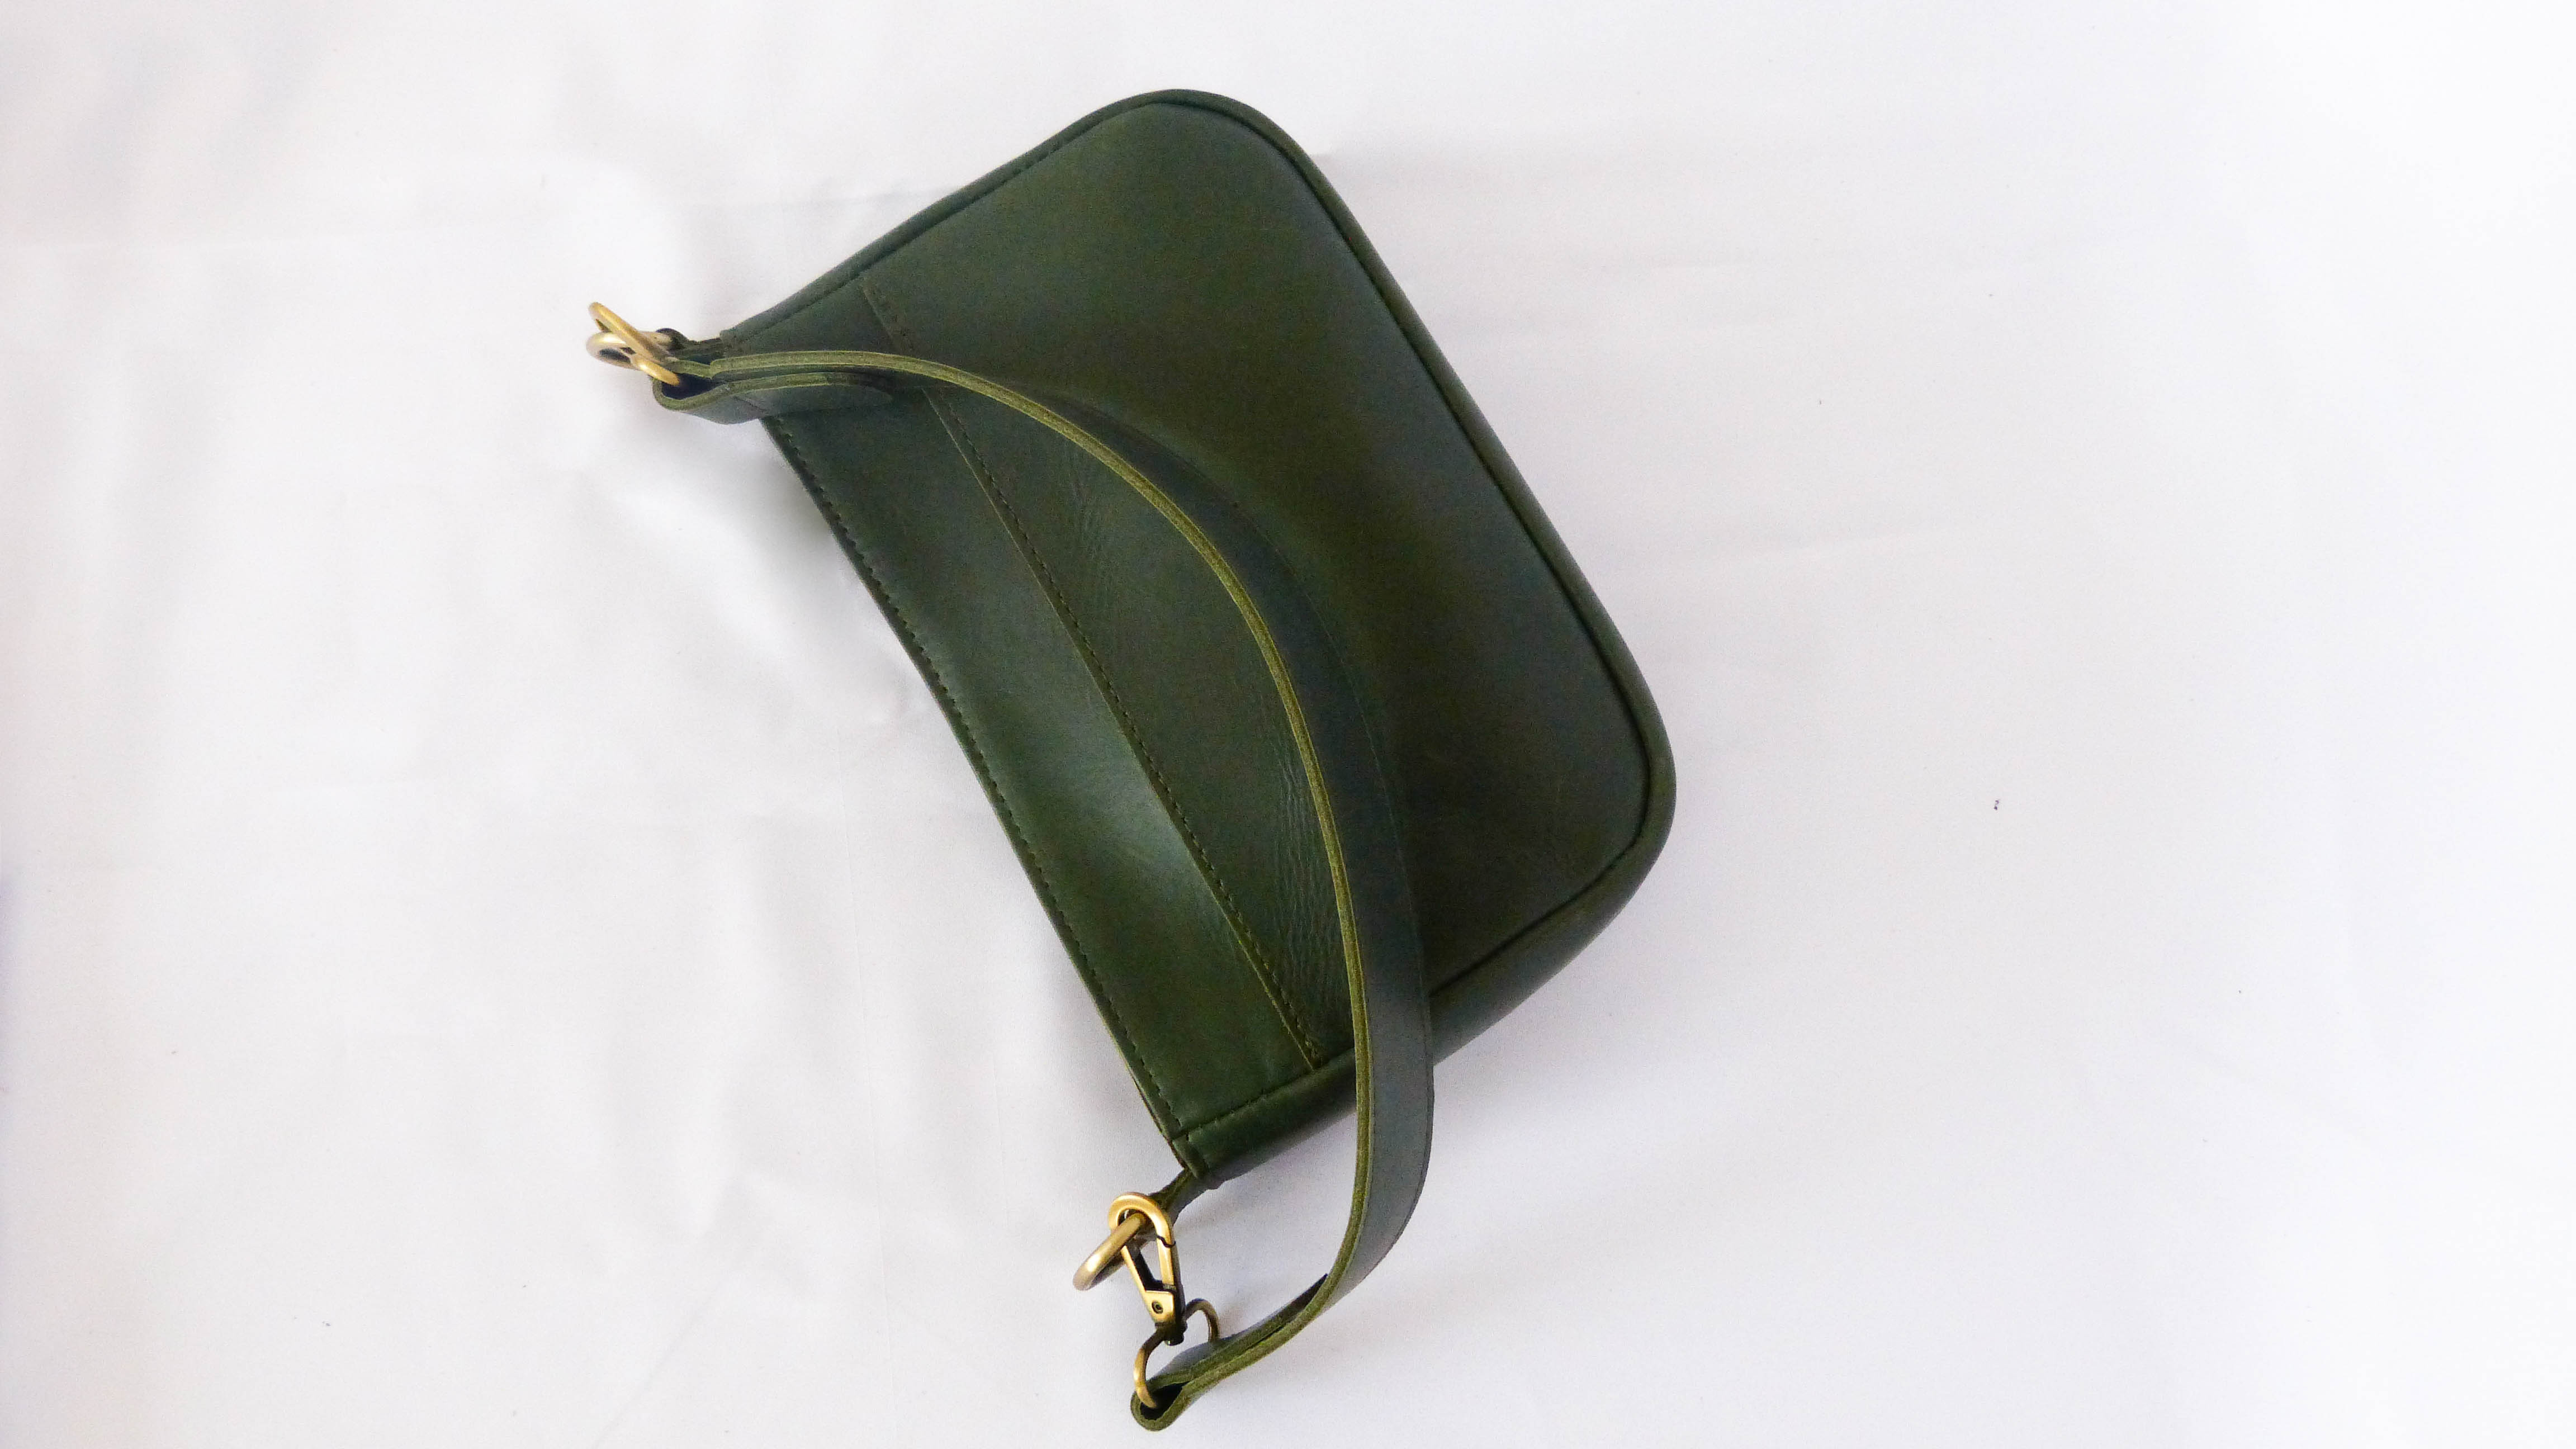 Handcrafted Jessica Leather Purse in Hunter Green, featuring removable shoulder strap, zippered top, inside pocket, and phone-sized outside pocket. Ethically made by Ethiopian artisans.